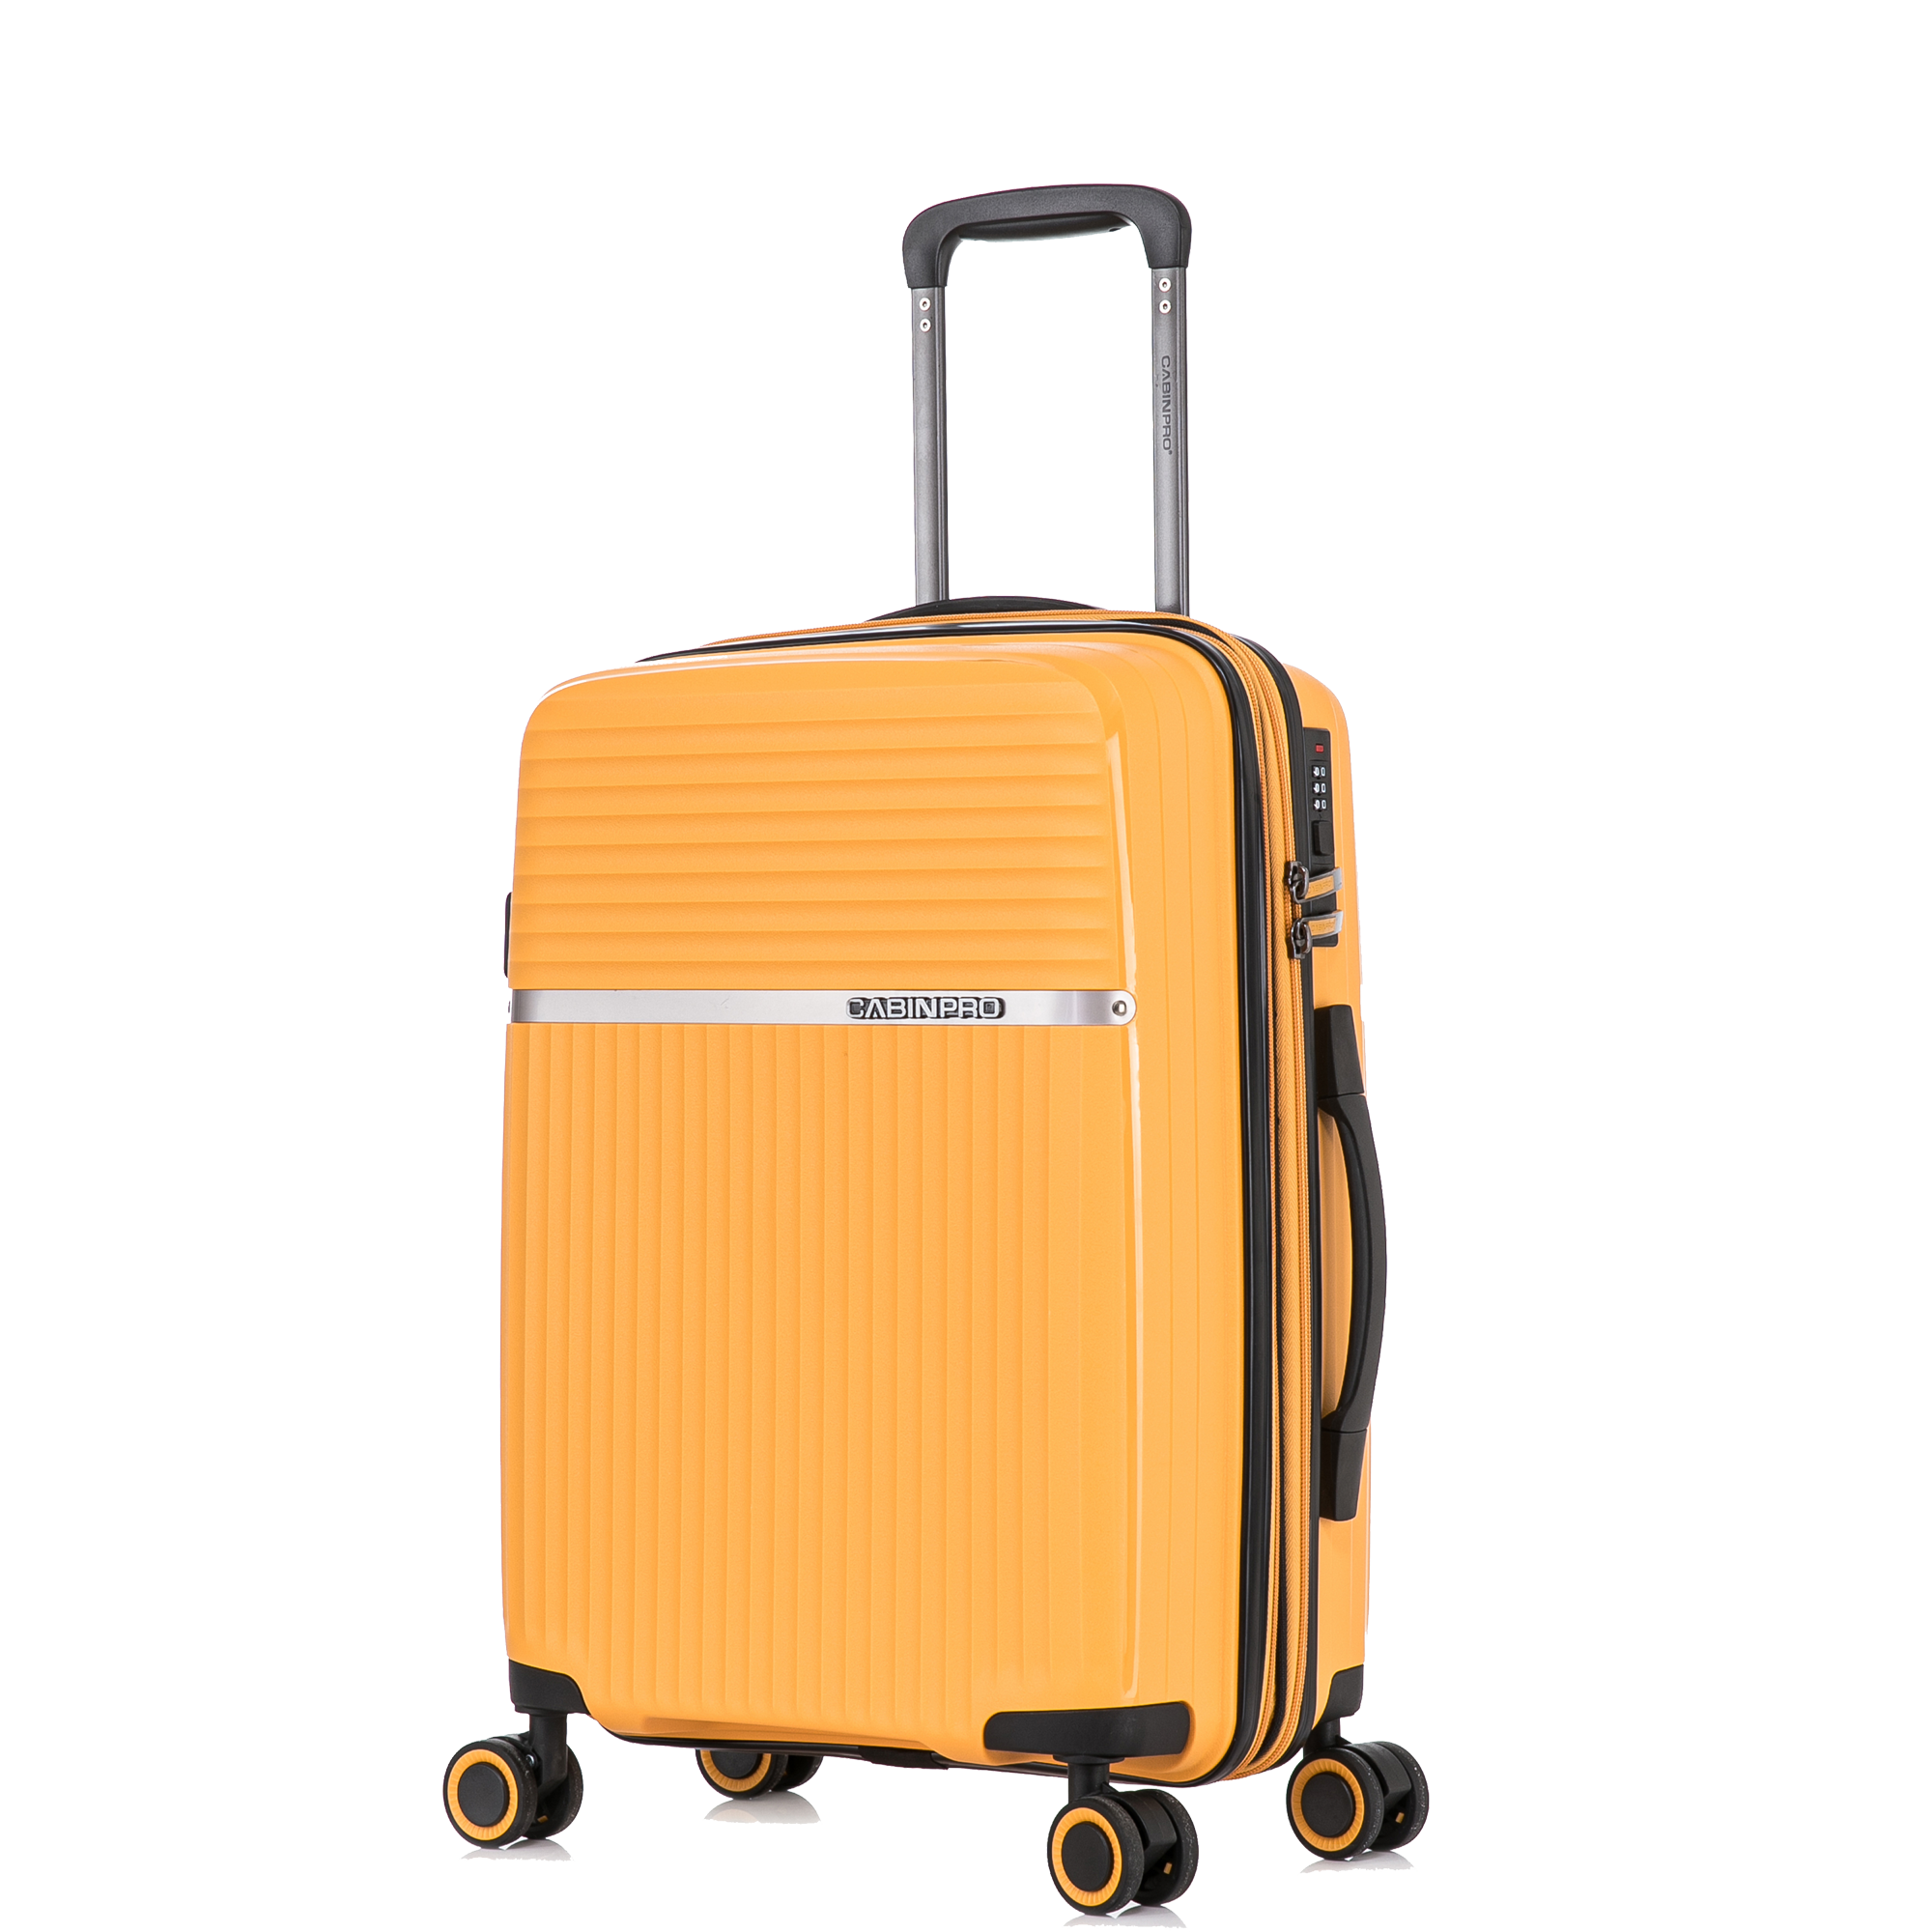 CabinPro Light Weight PP Fashion Trolley Luggage Expandable Hard Case